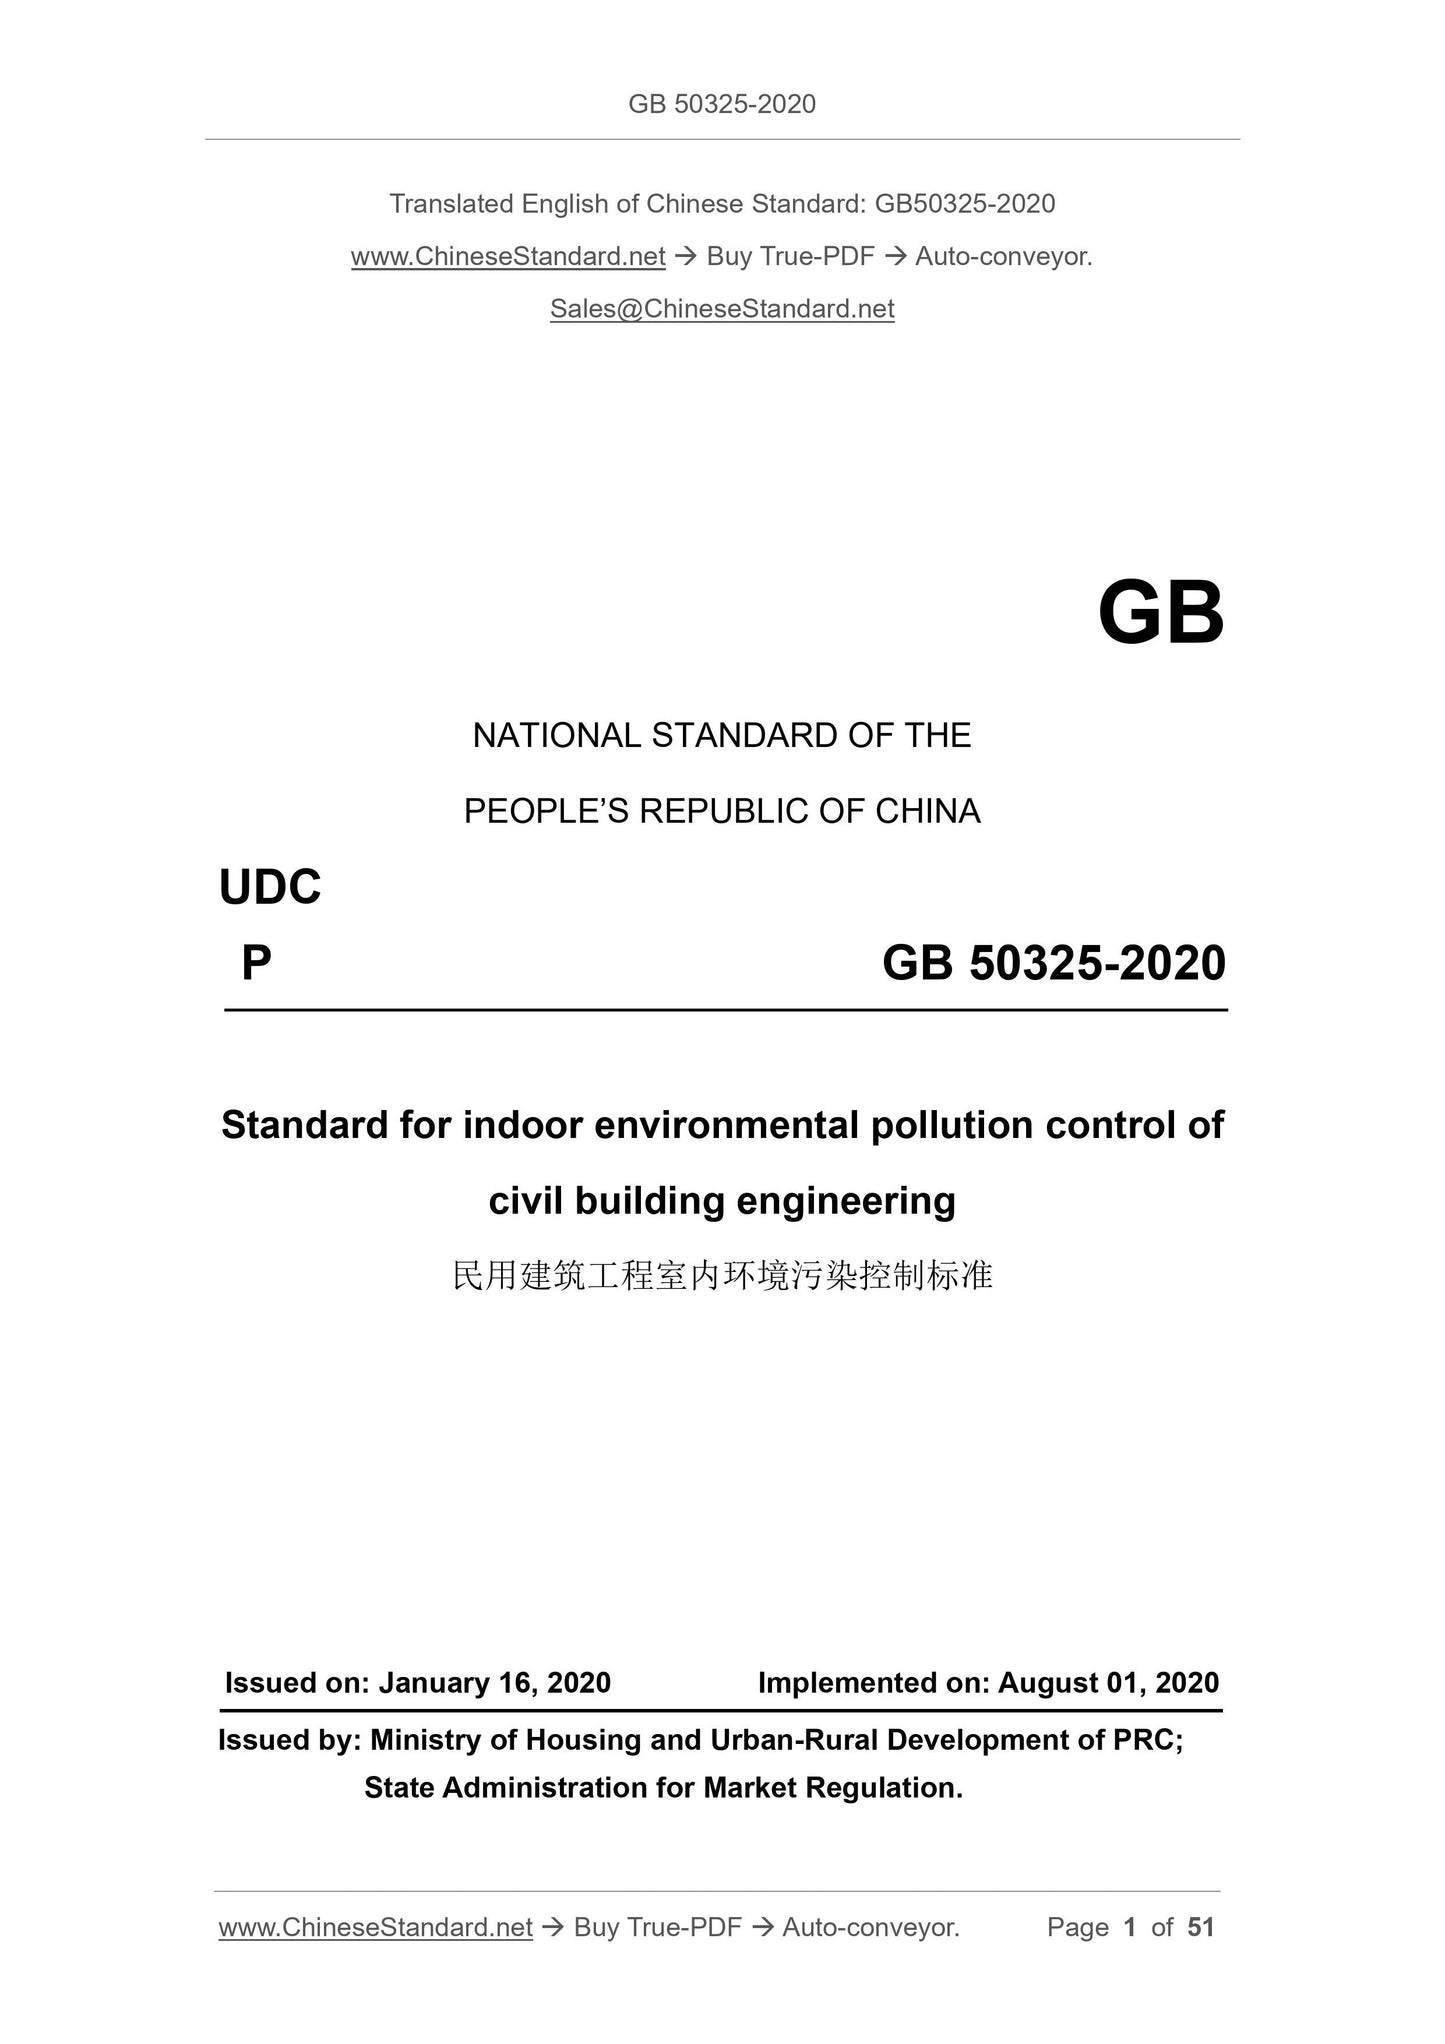 GB 50325-2020 Page 1